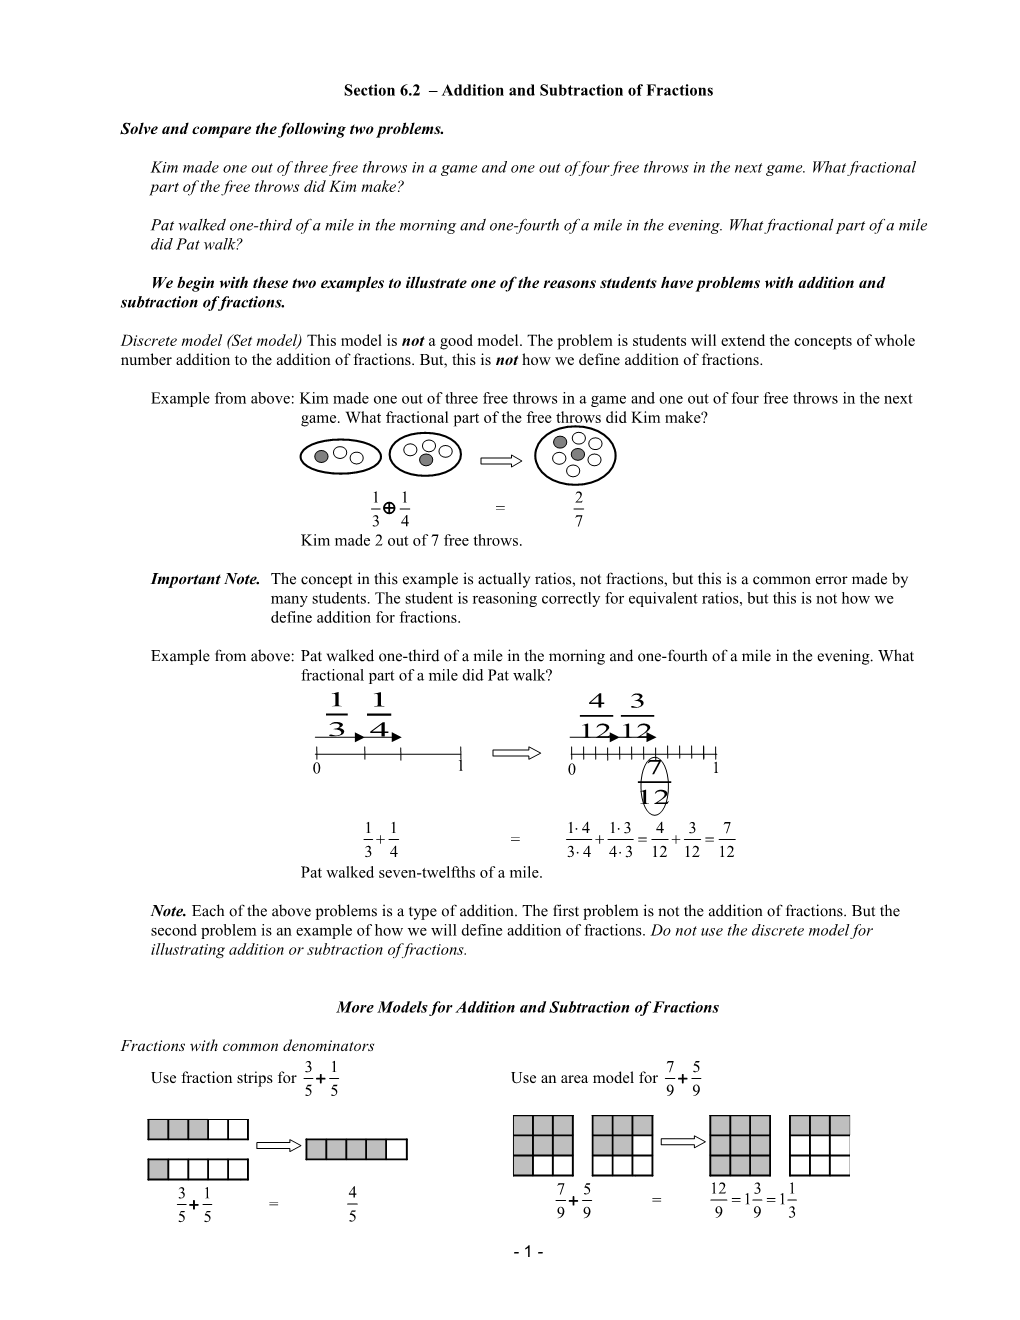 Section 6.2 Addition and Subtraction of Fractions